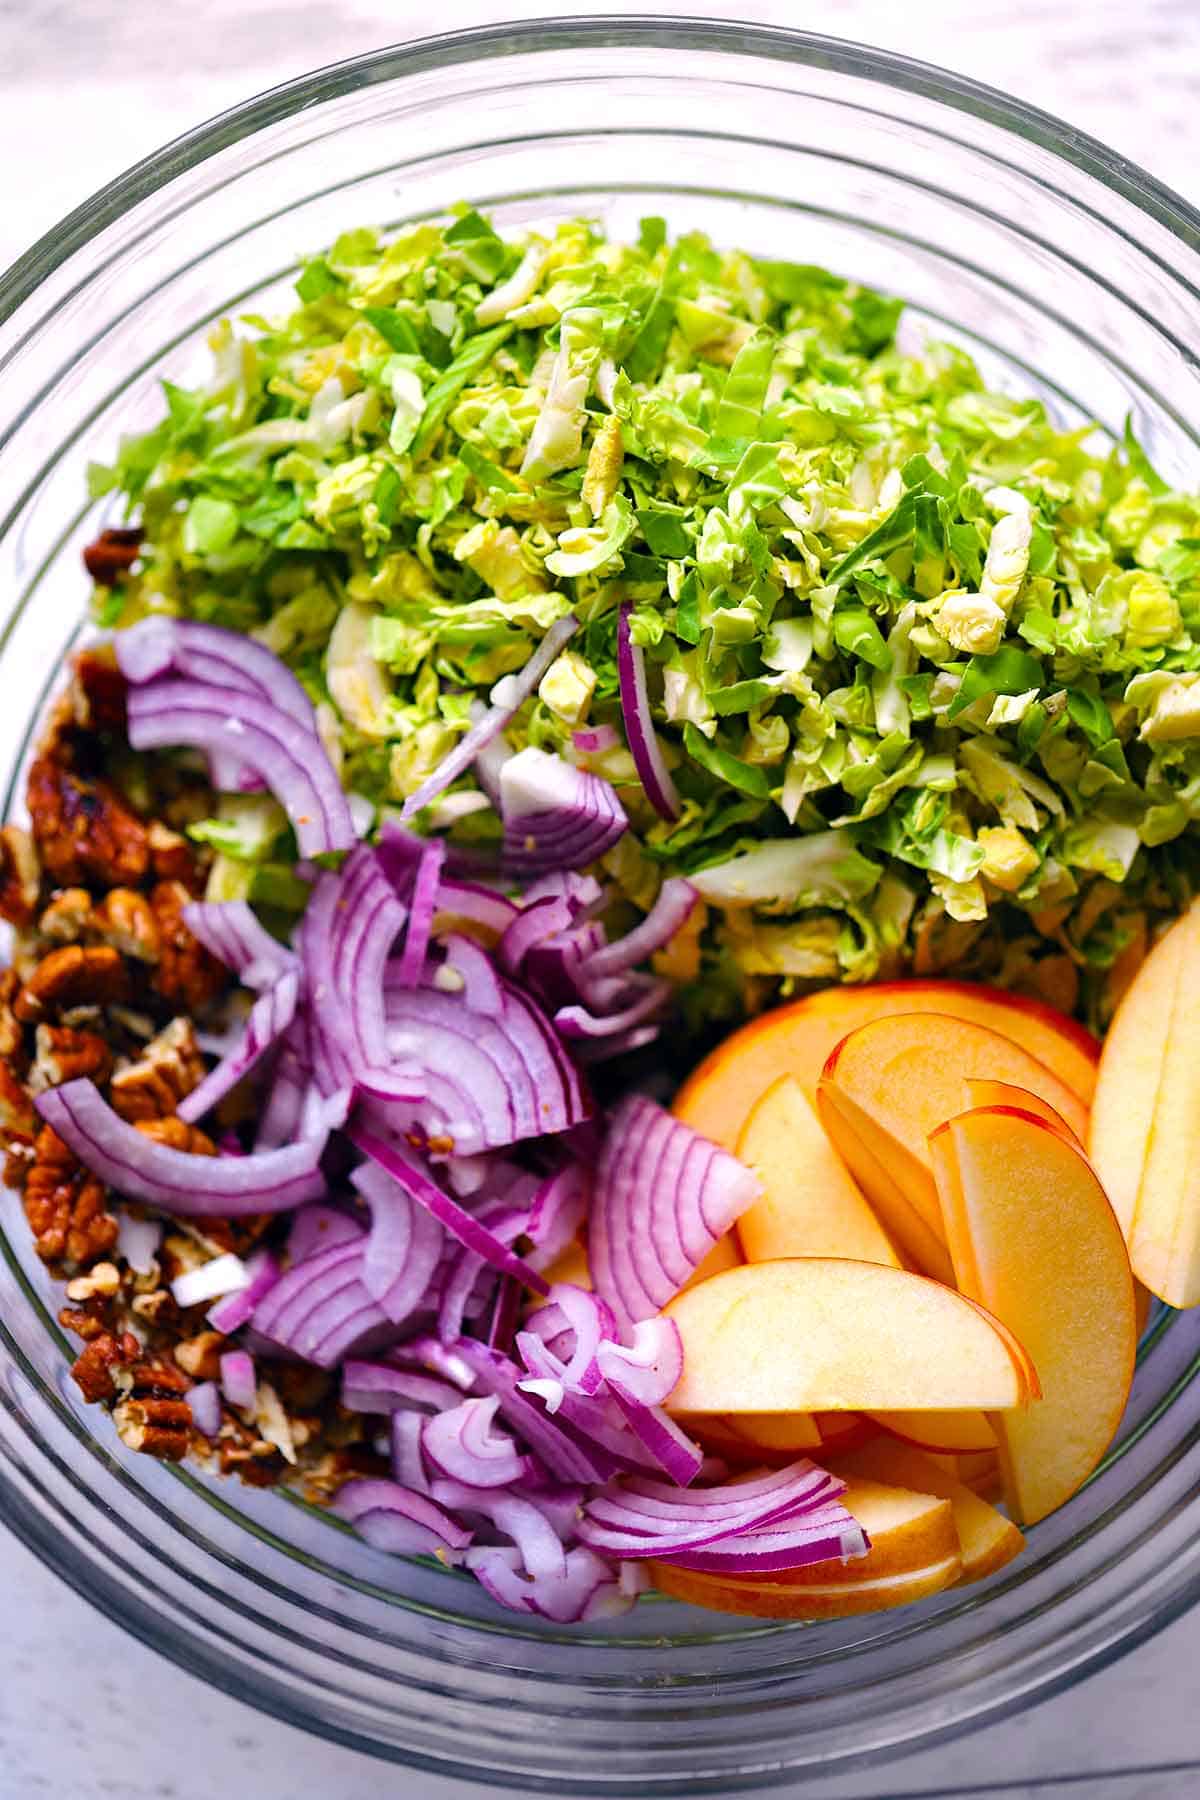 Shaved brussels sprouts, sliced apples, red onions, and candied pecans in a clear bowl.